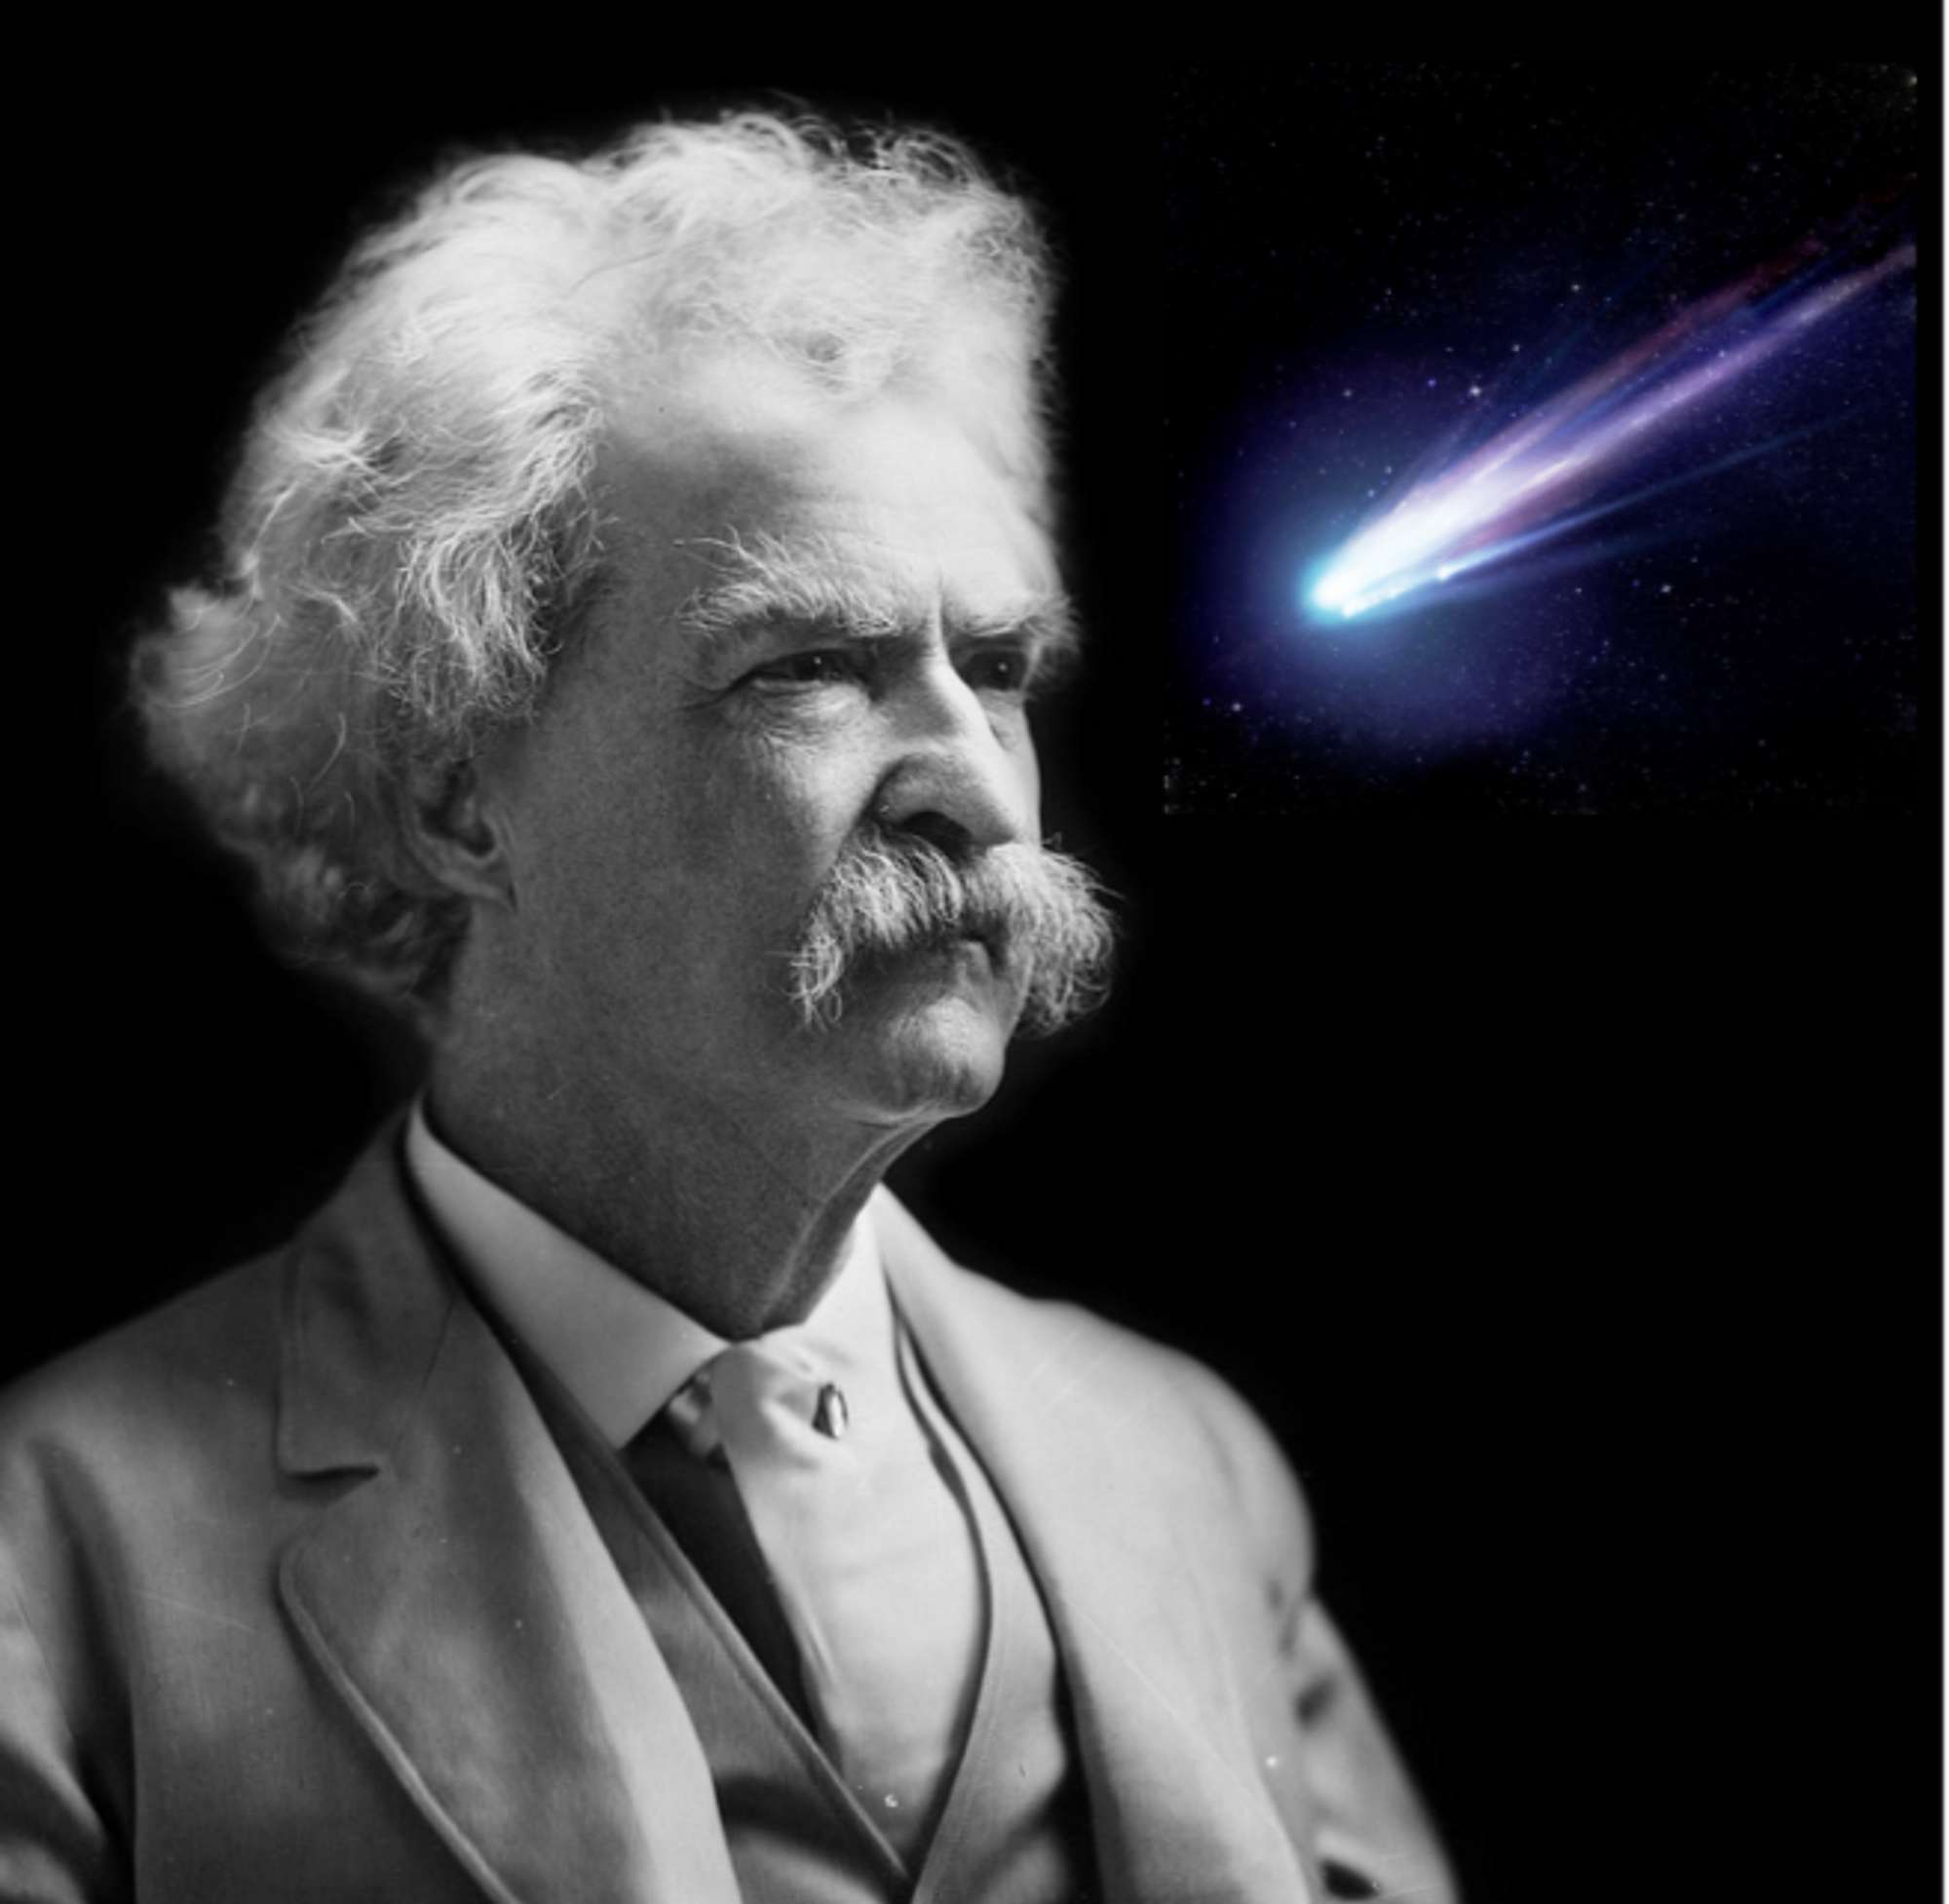 Mark Twain considering the approach of Halley’s Comet